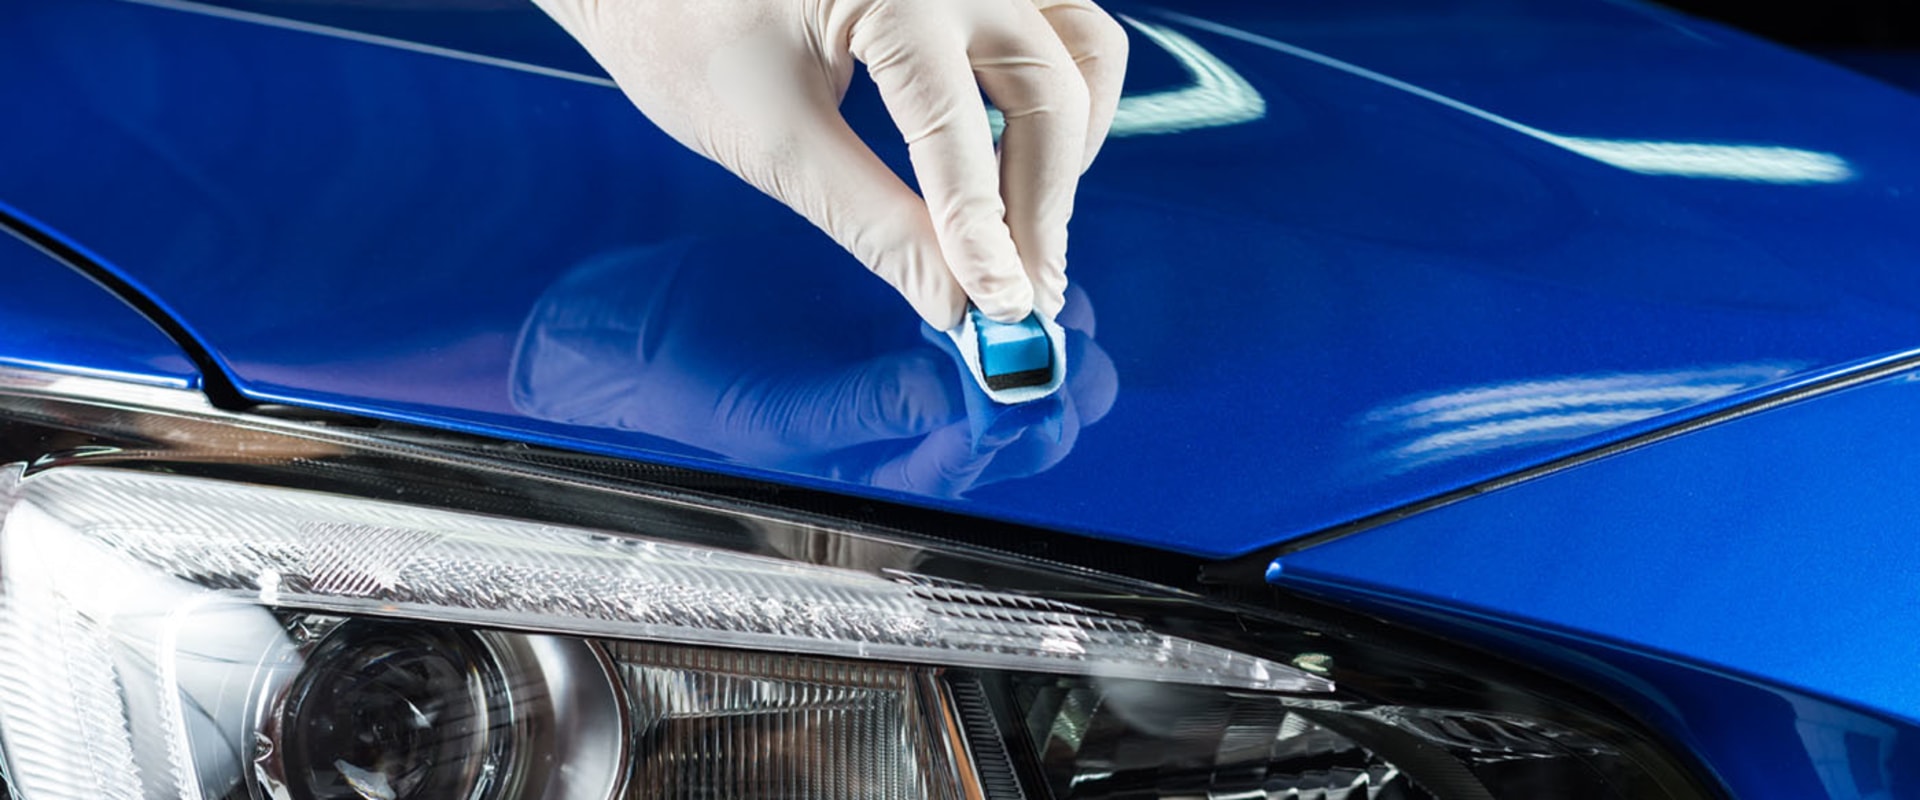 Is car detailing a growing business?